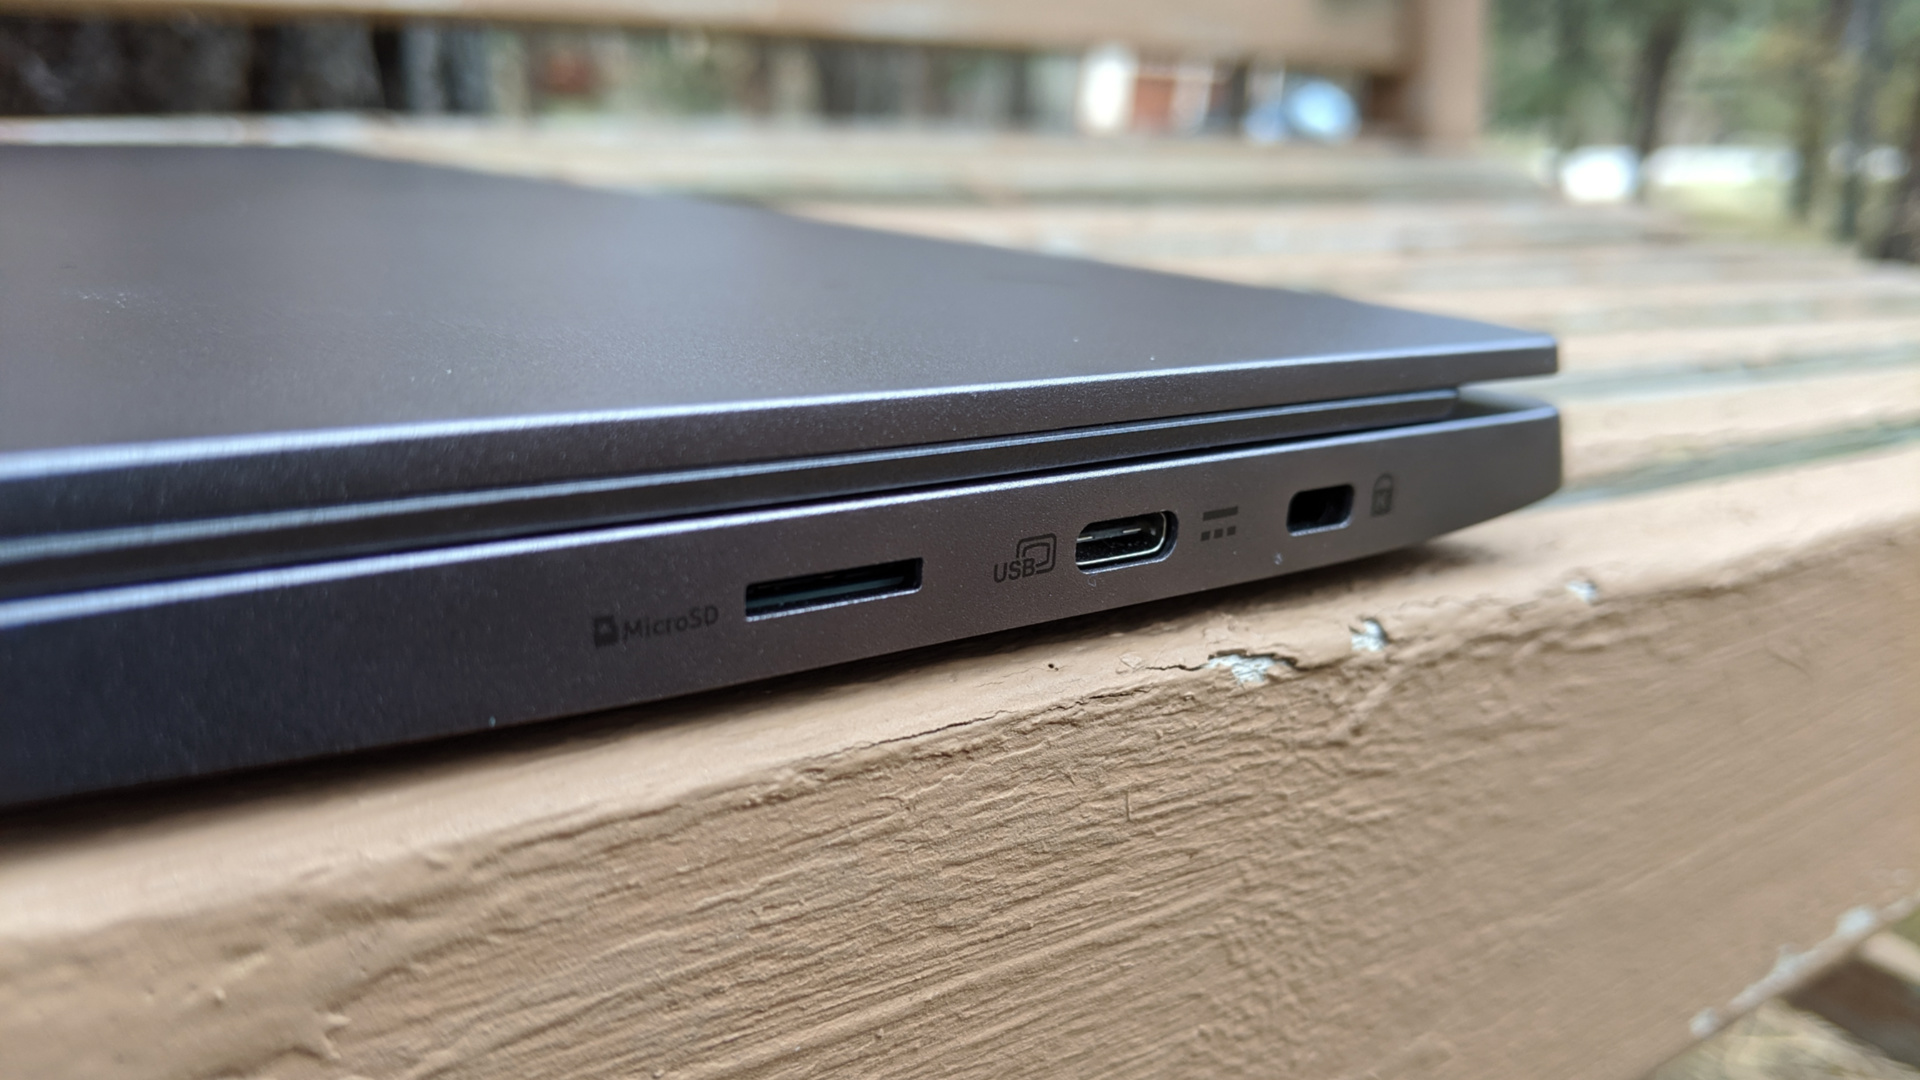 Right side of the Acer Chromebook 714